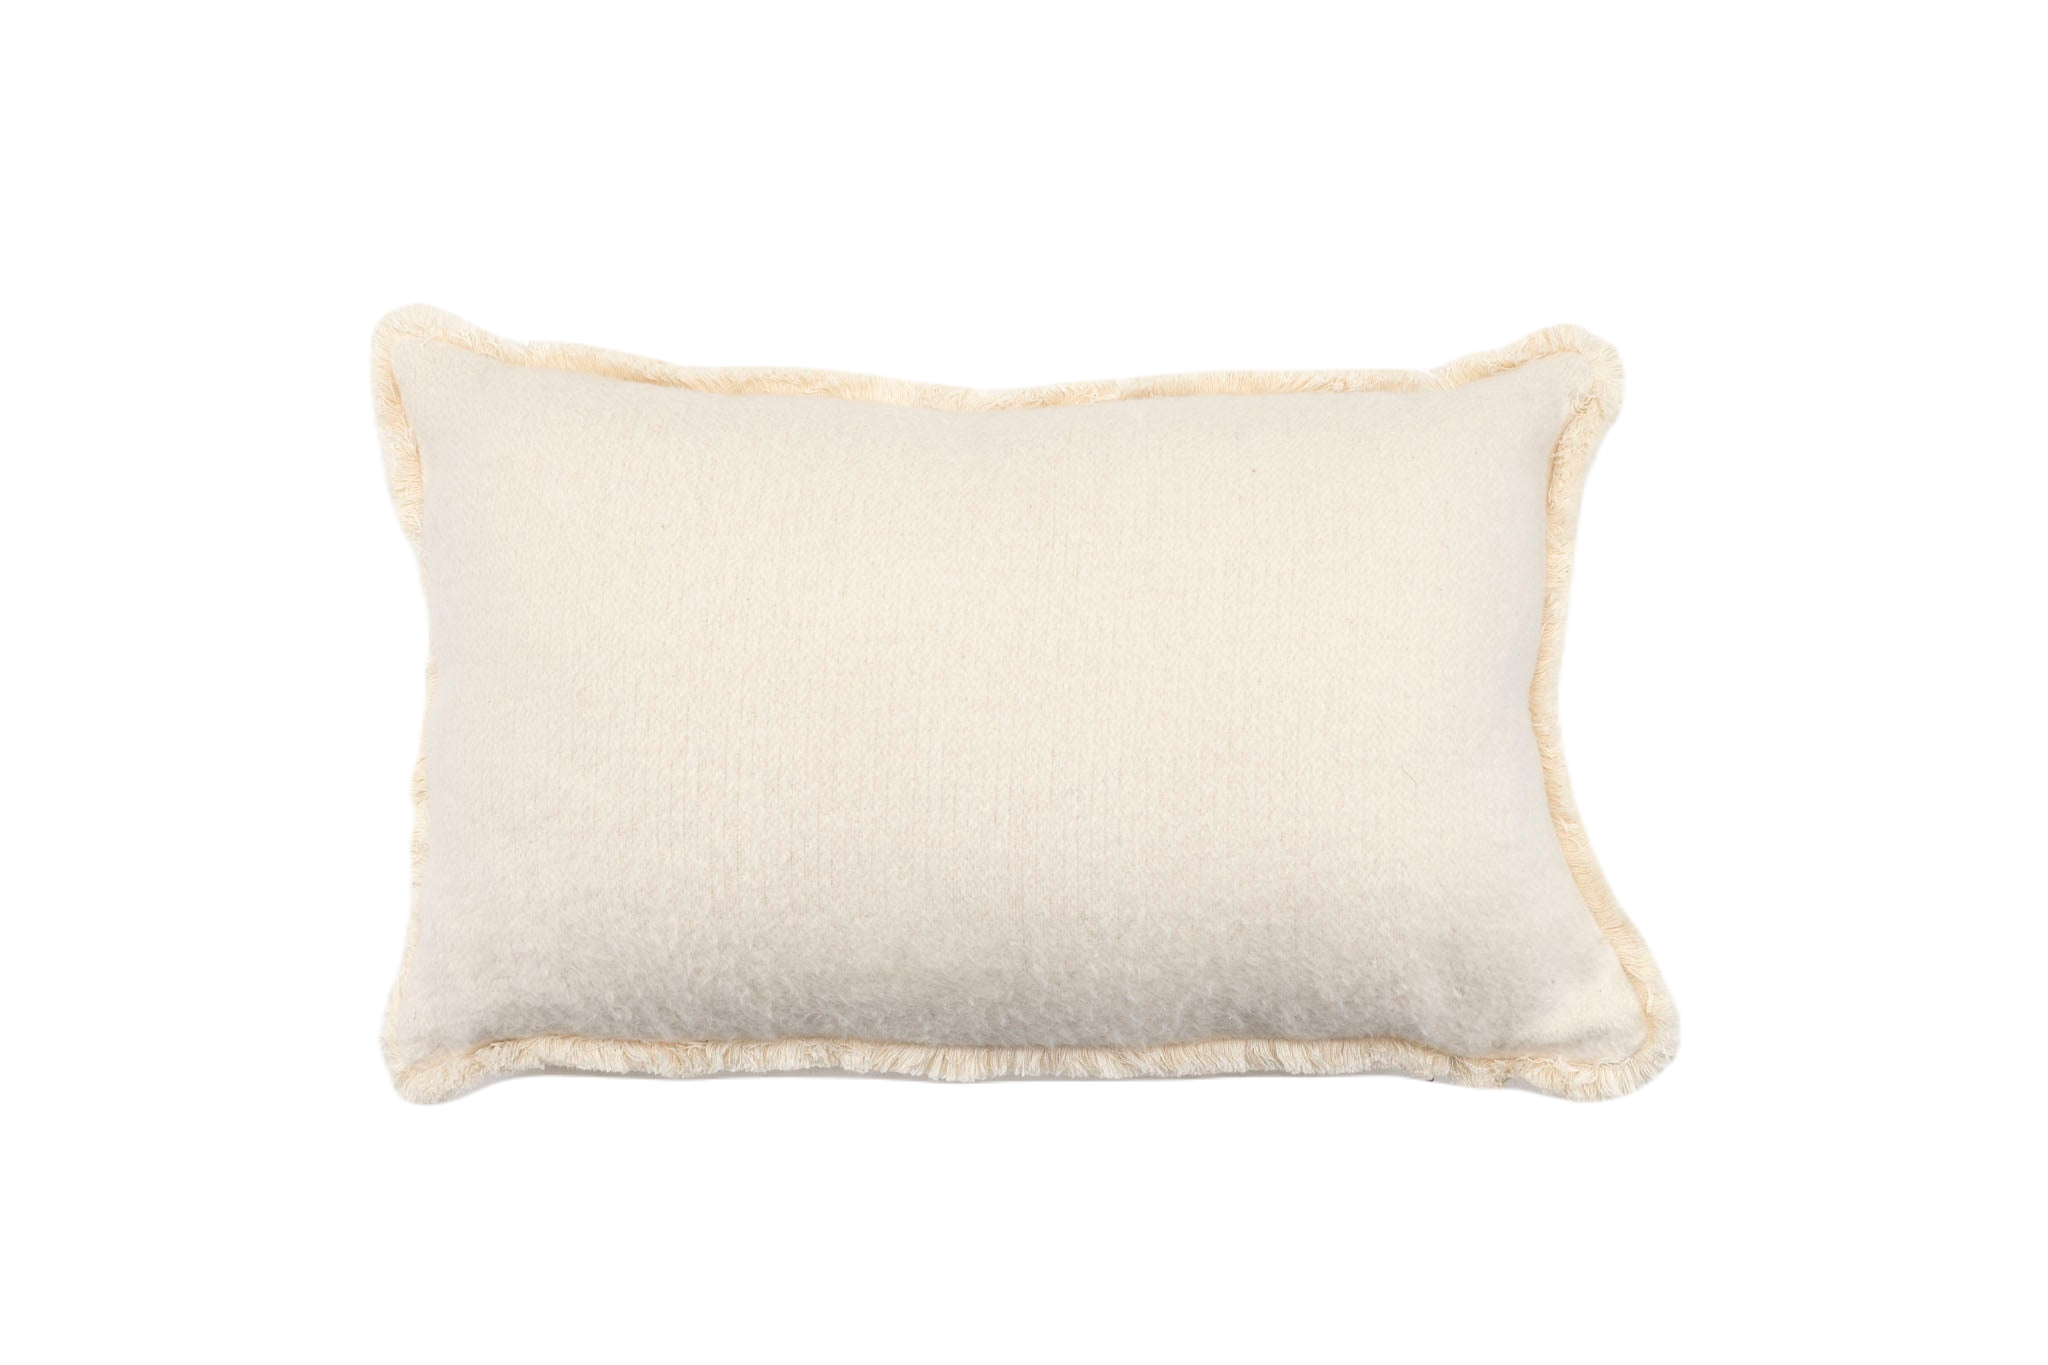 Pillow: Embroidered antique and vintage Hungarian hemp - P186